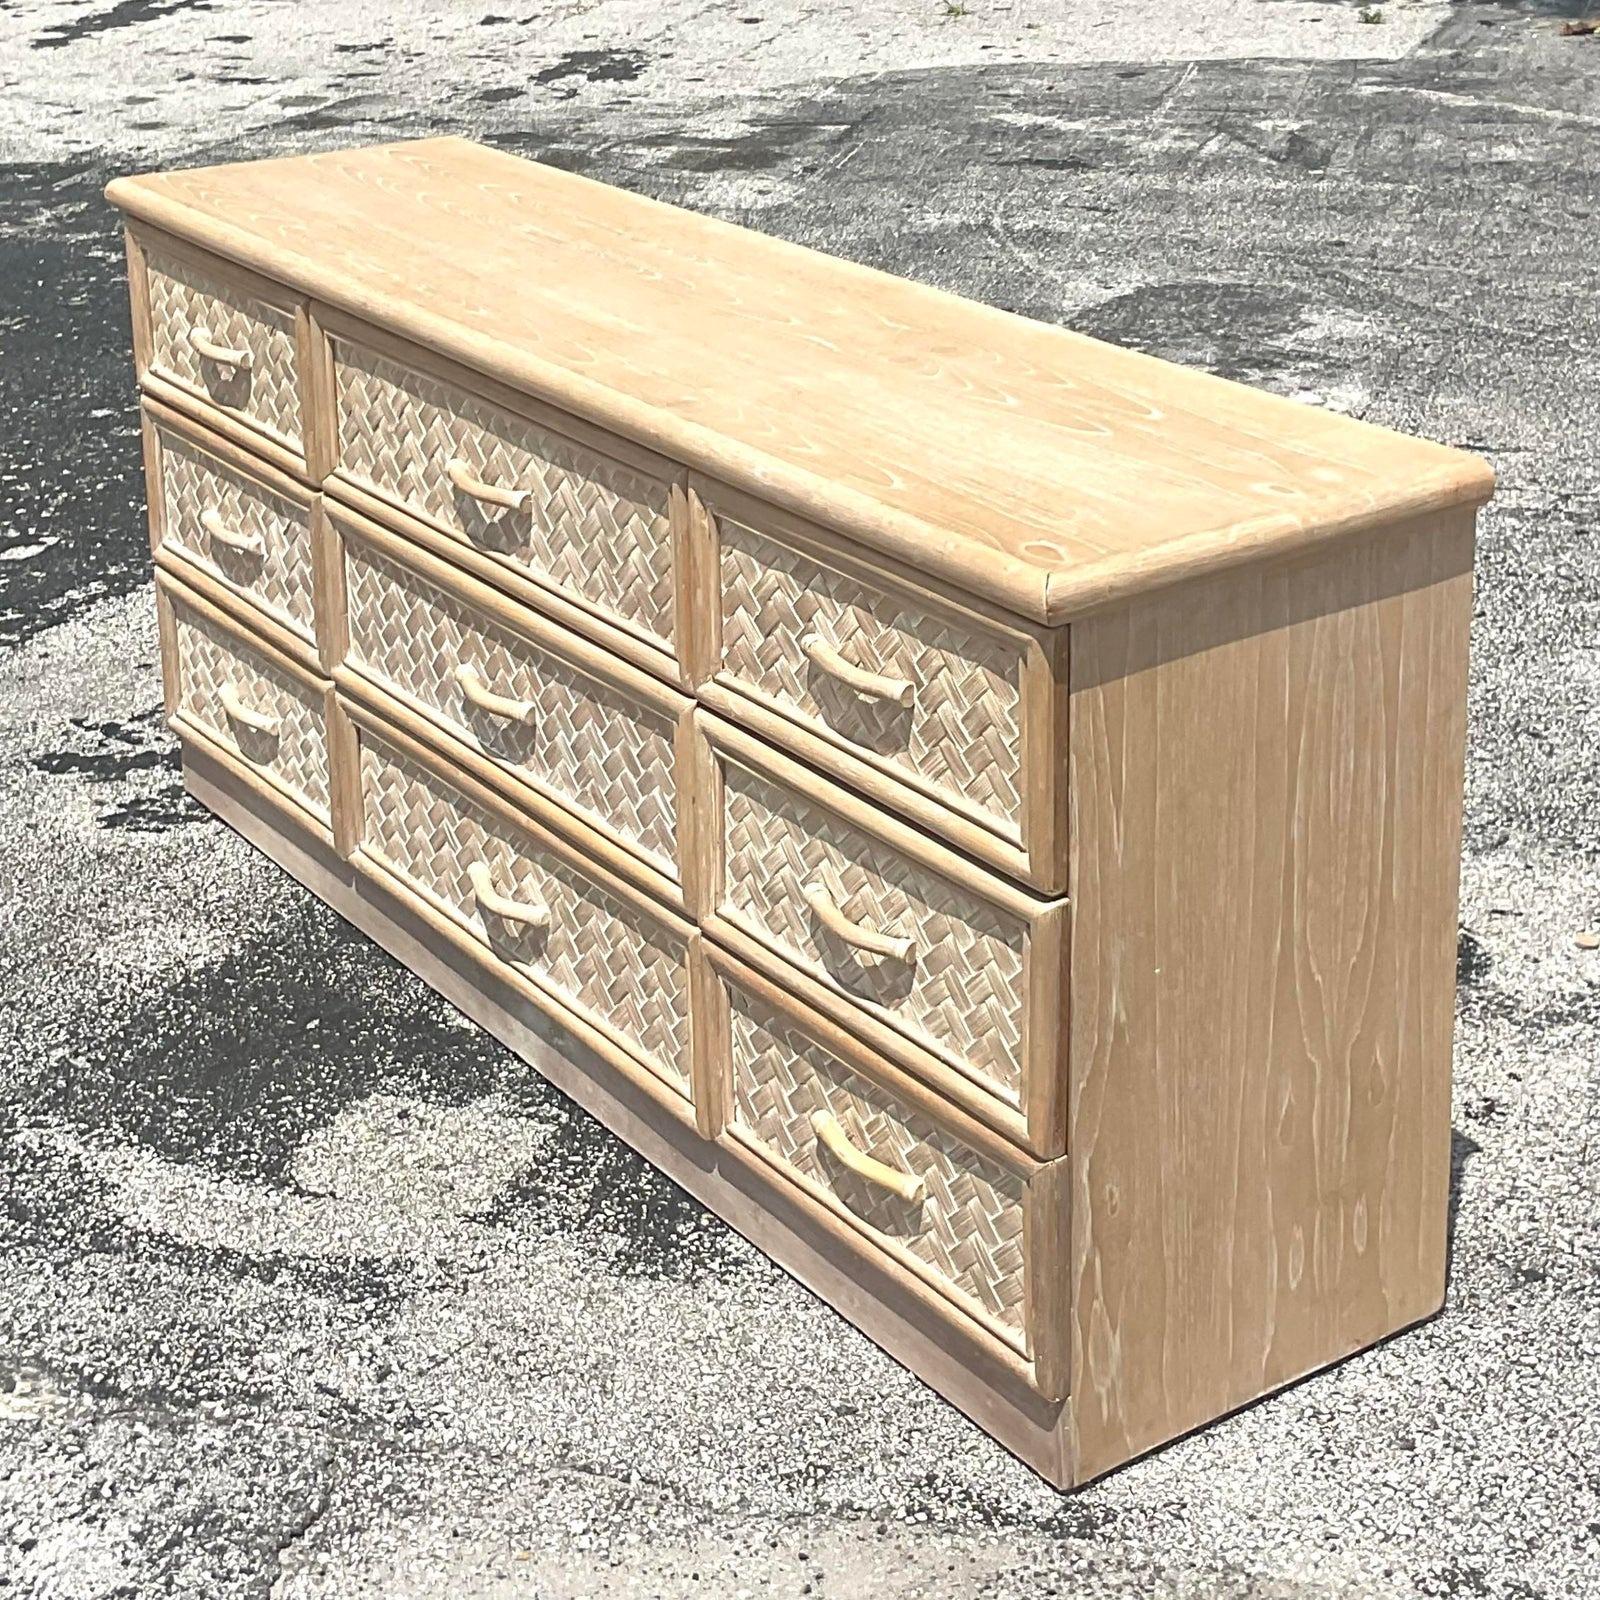 A fabulous vintage Coastal dresser. A chic cerused wood cabinet with parquet rattan drawer fronts. Acquired from a Palm Beach estate. 